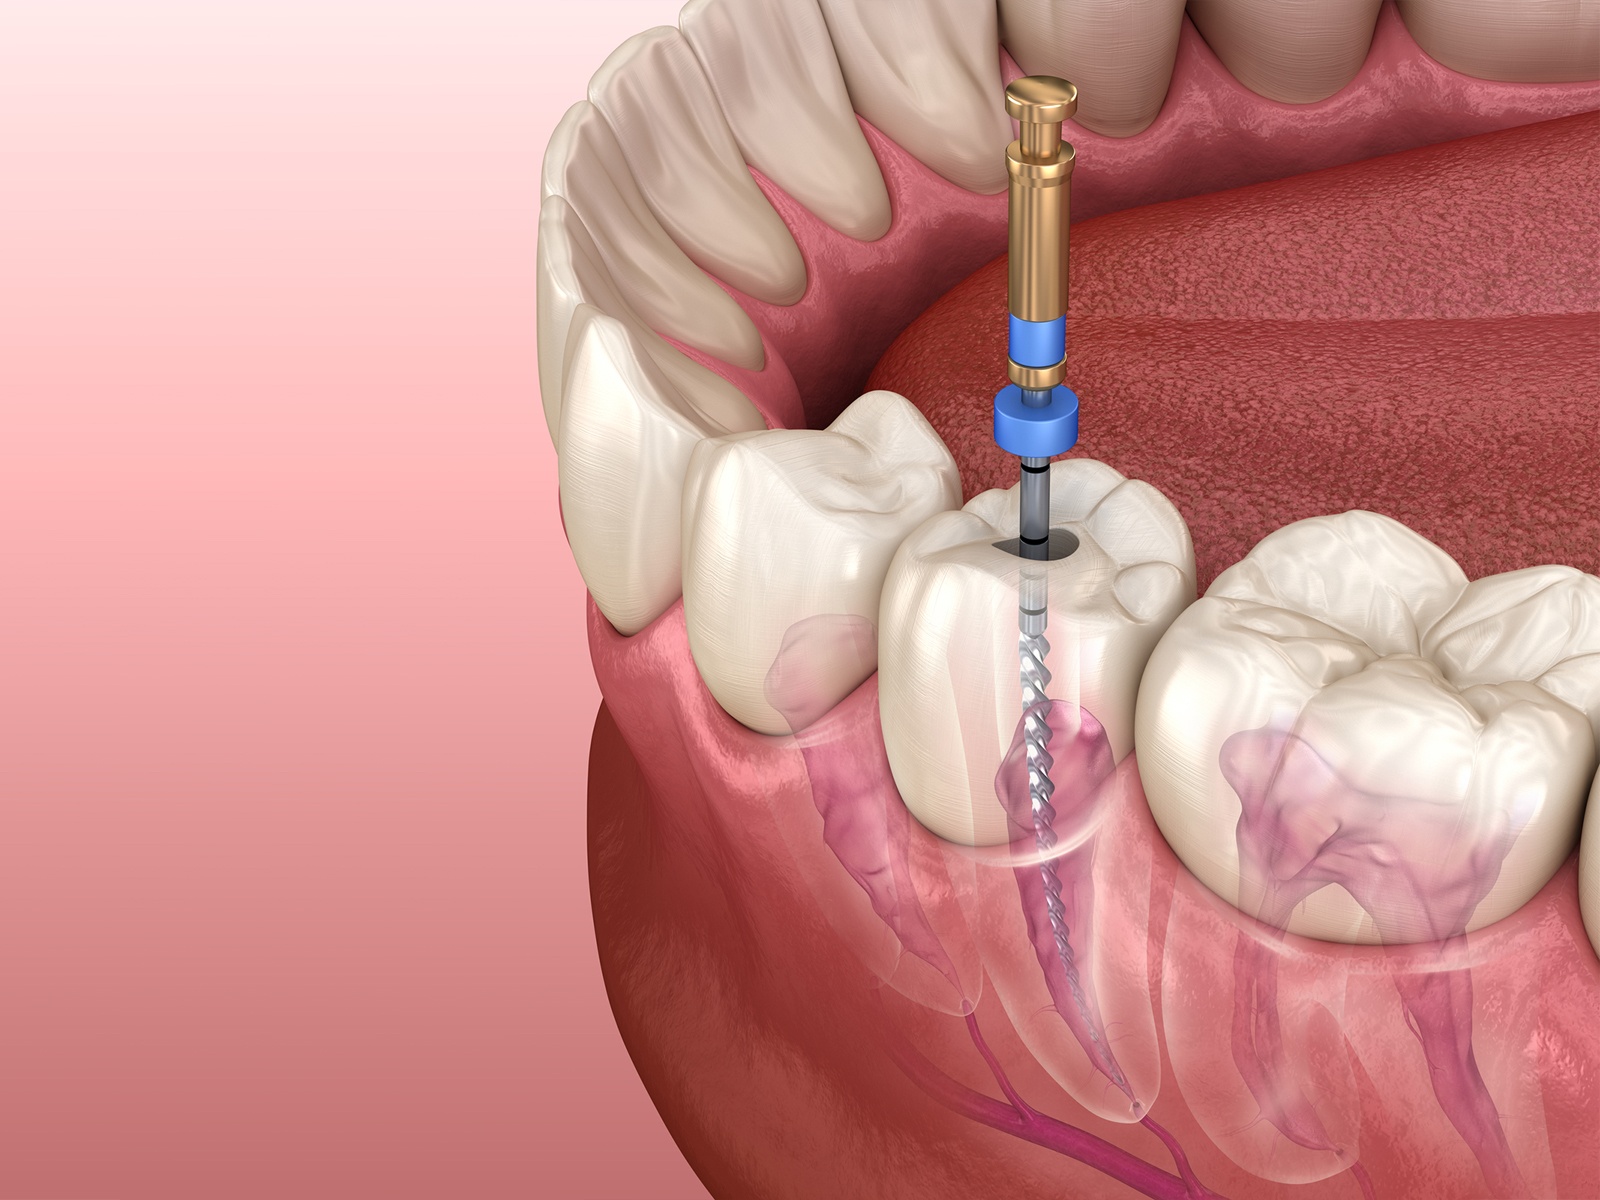 Can Amoxicillin Treat Root Canal Infection?